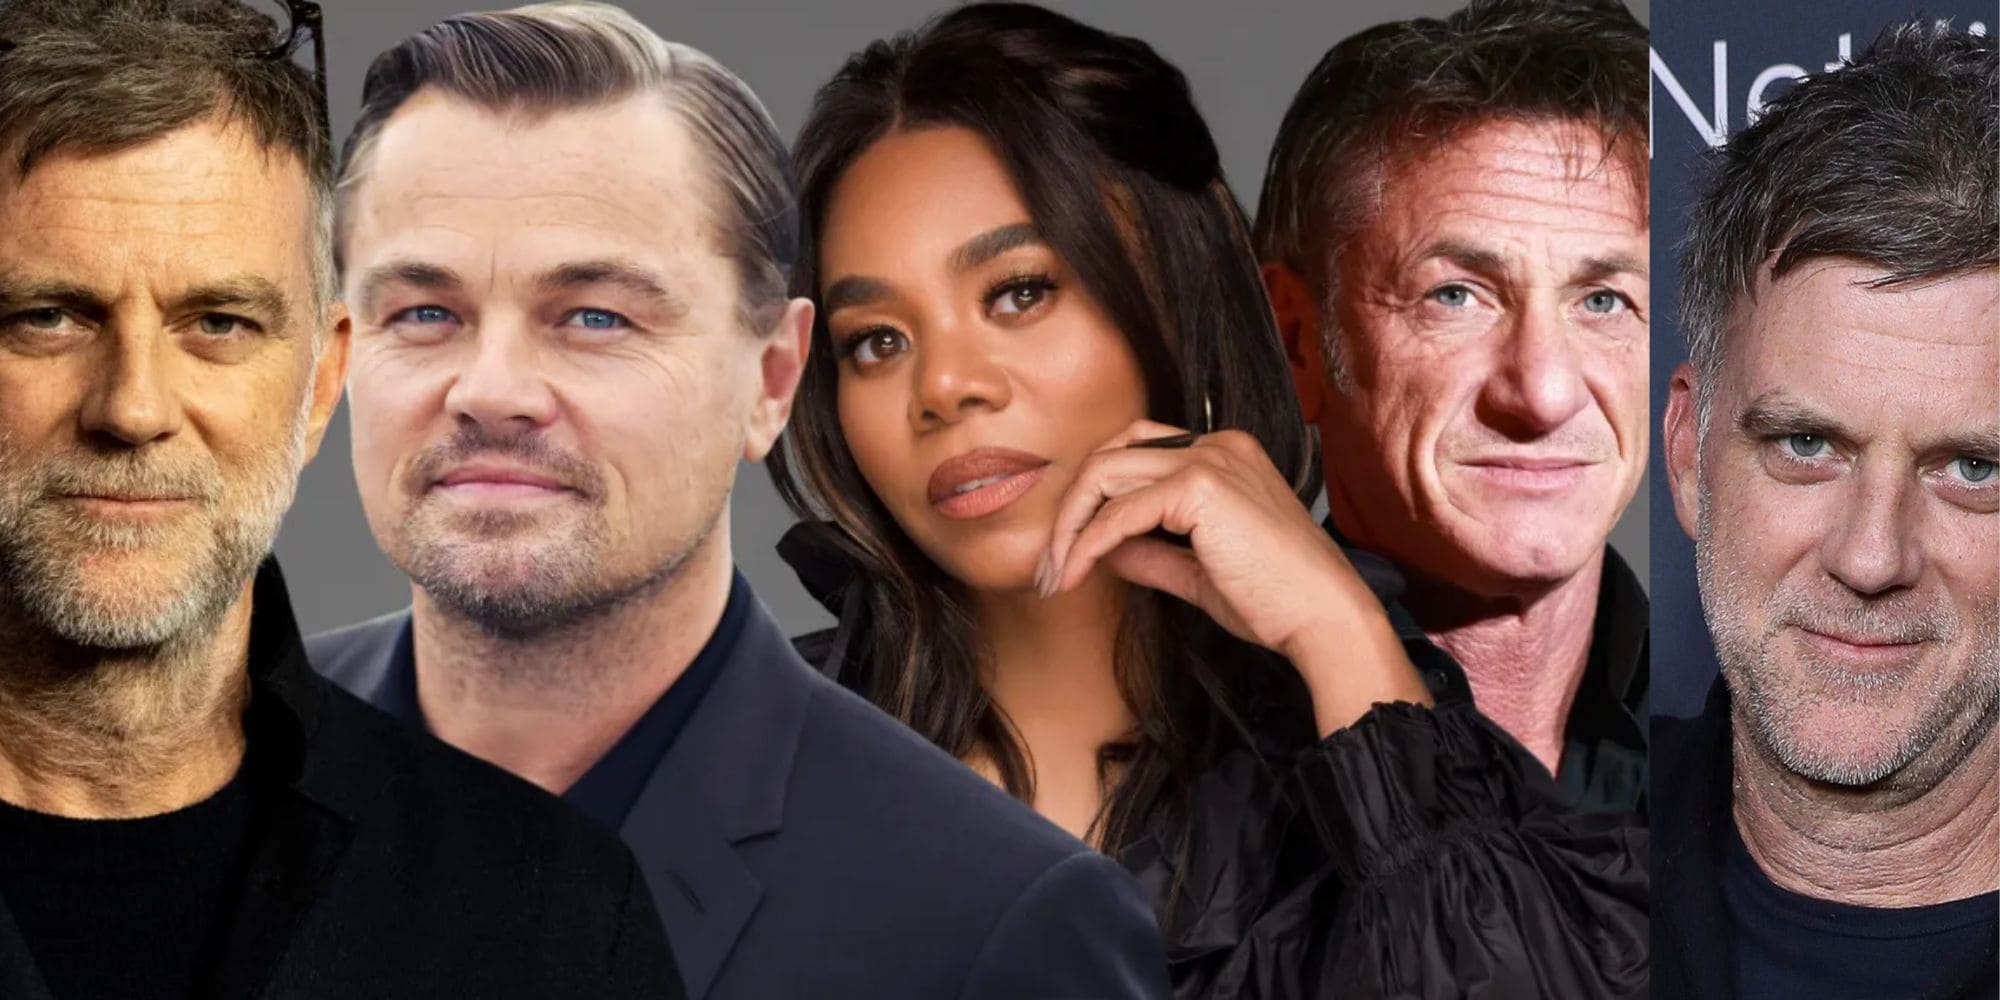 A Movie Filming in Eureka by Famous Director Paul Thomas Anderson, Starring Leonardo Dicaprio, Sean Penn, and Regina Hall